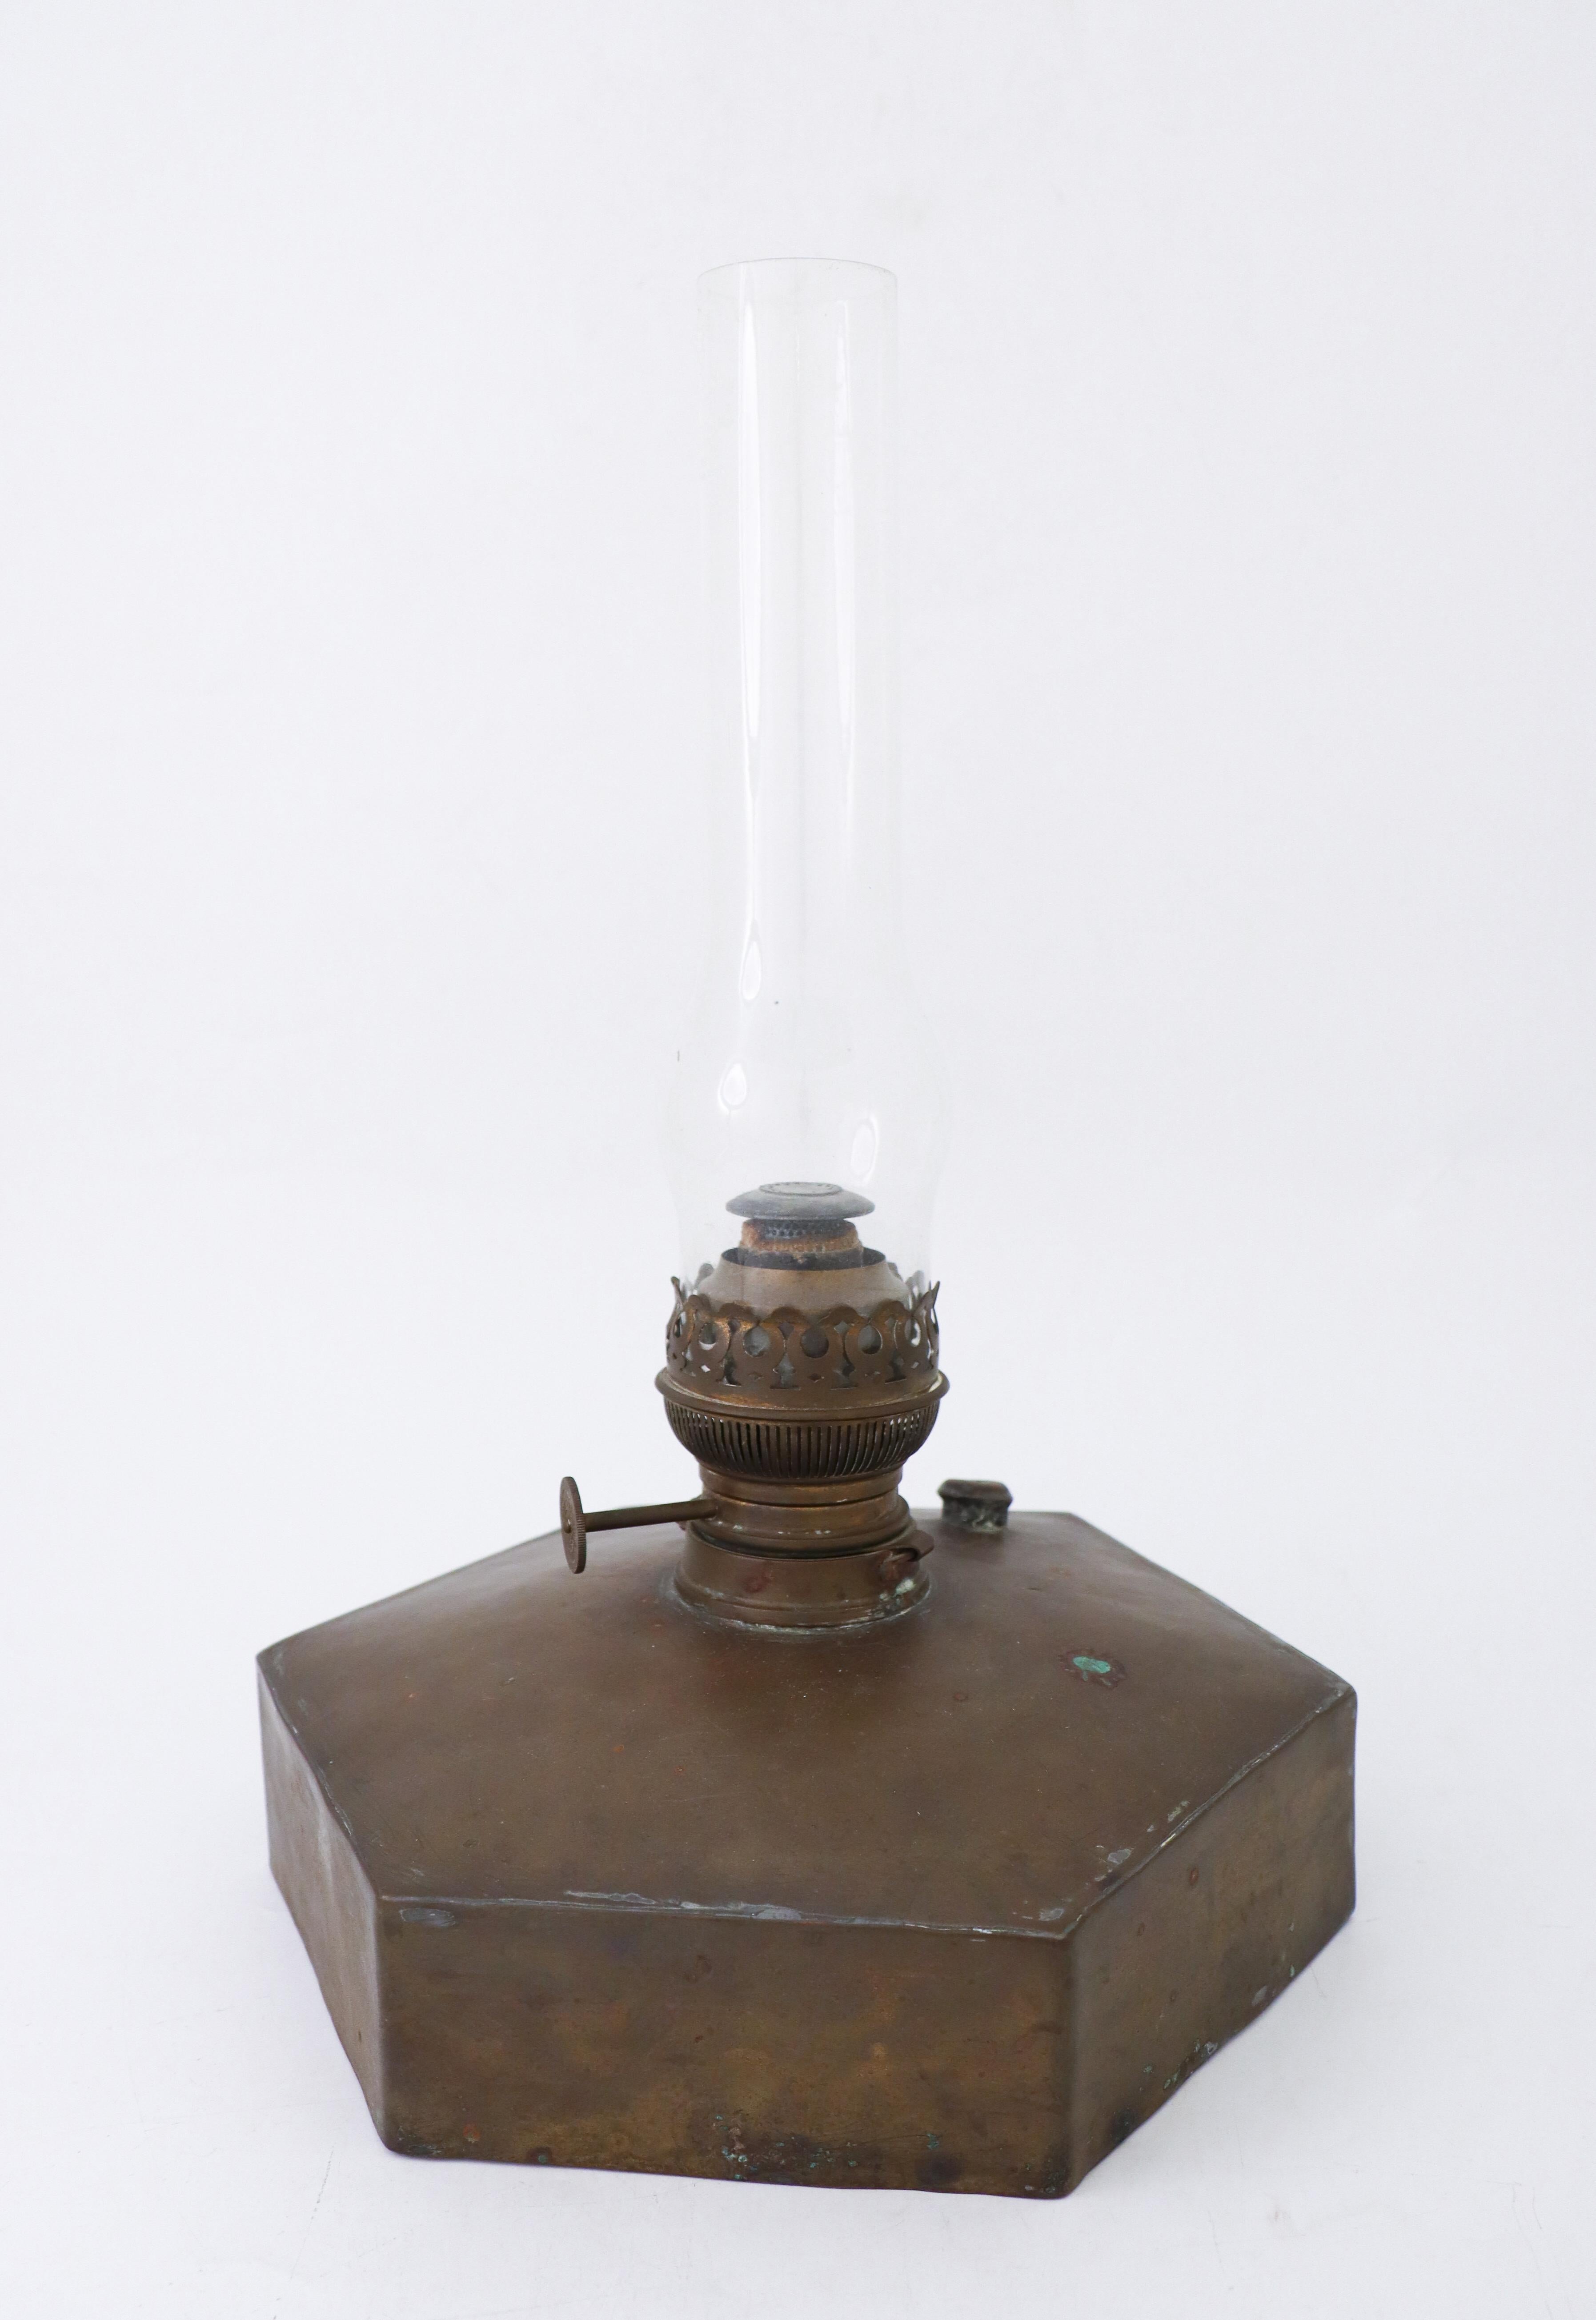 A kerosene lamp made in brass probably from the late 19th century. It is 41 cm high (including the glass) and it is 29 cm in diameter. It is in very good condition except from some minor marks in the brass.